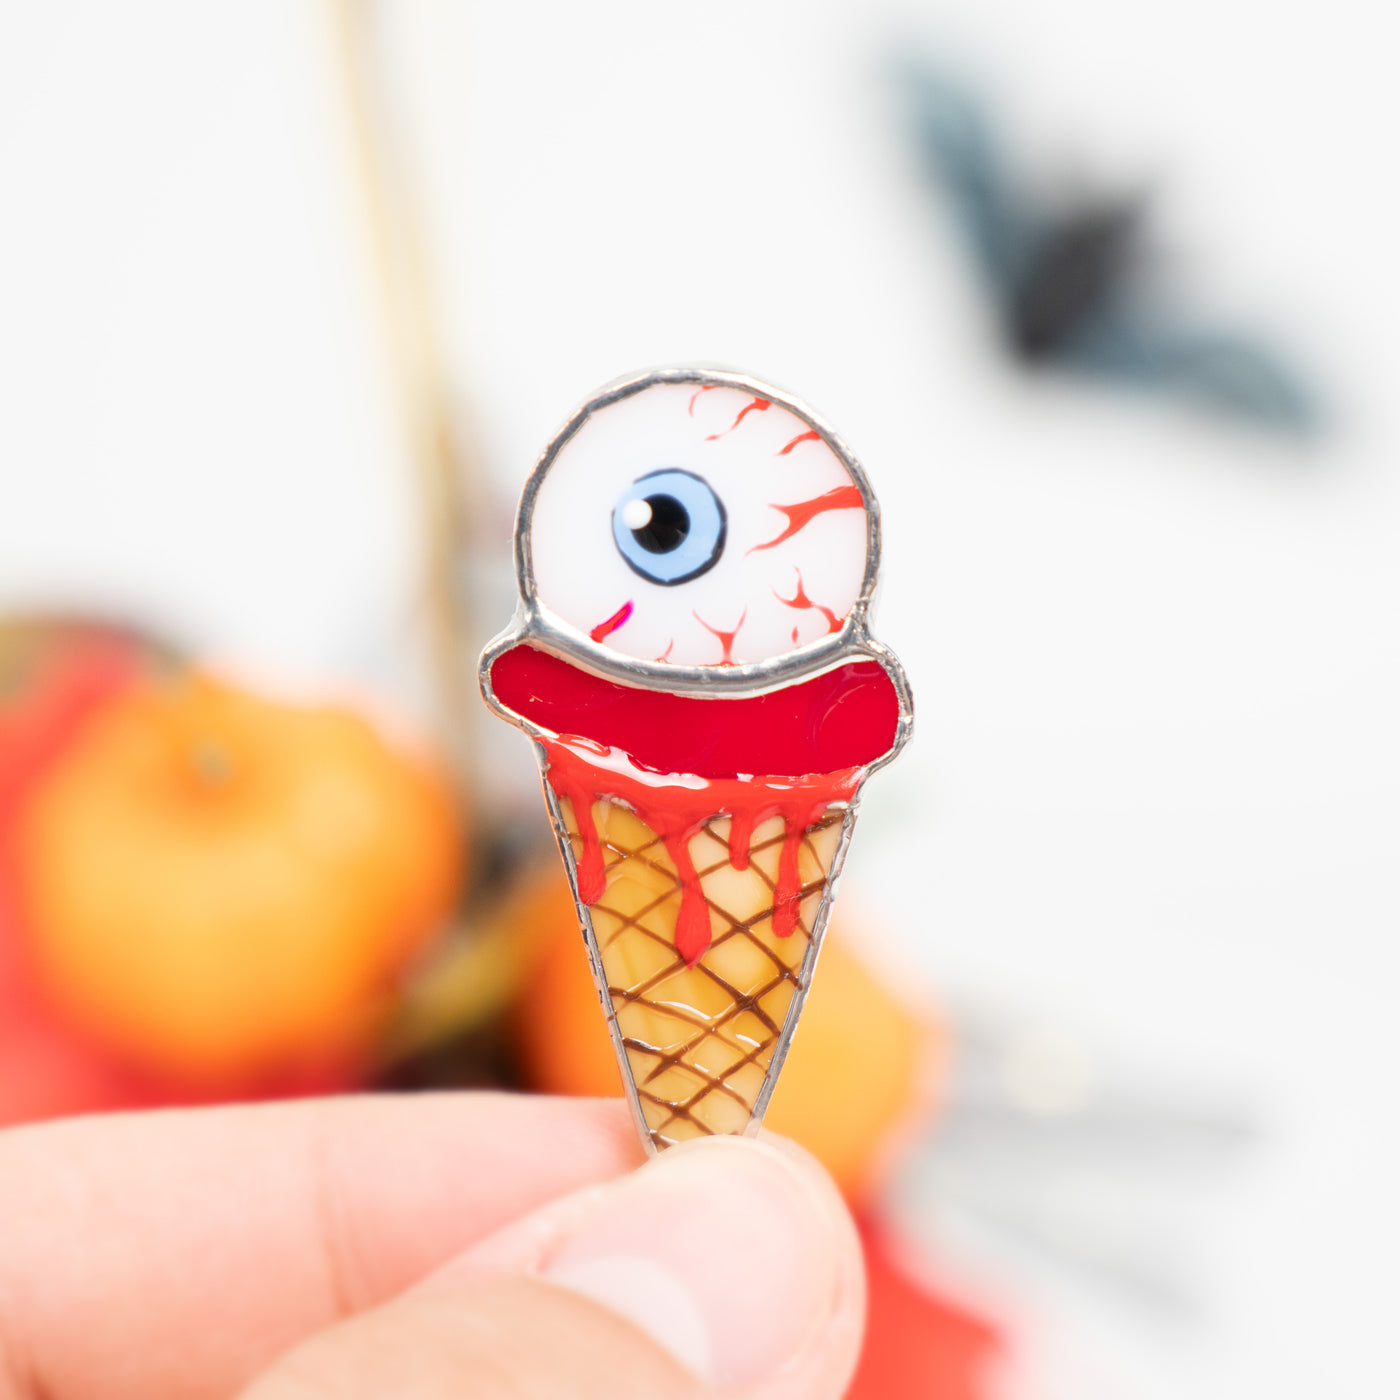 Ice-cream with the torn out eye pin of stained glass 